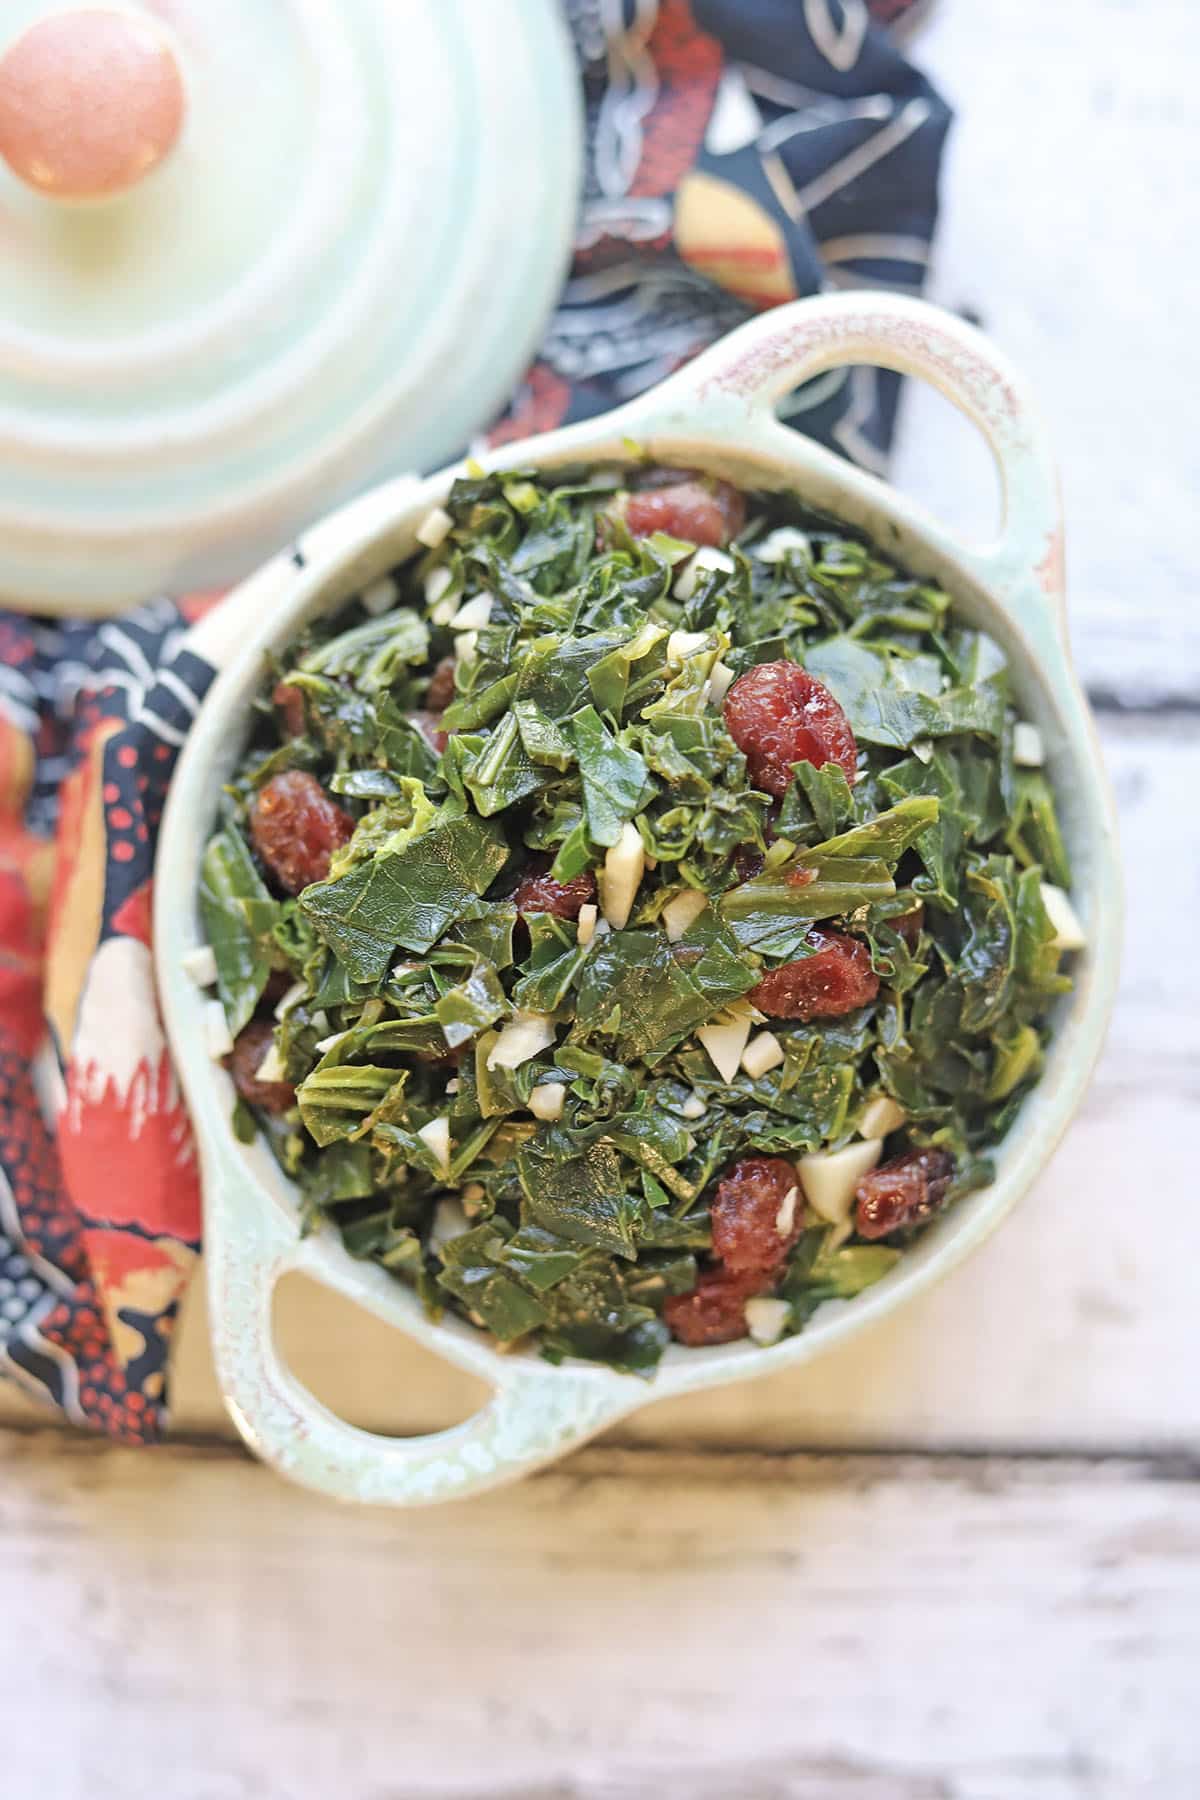 Collard greens with dried cranberries in a serving dish.